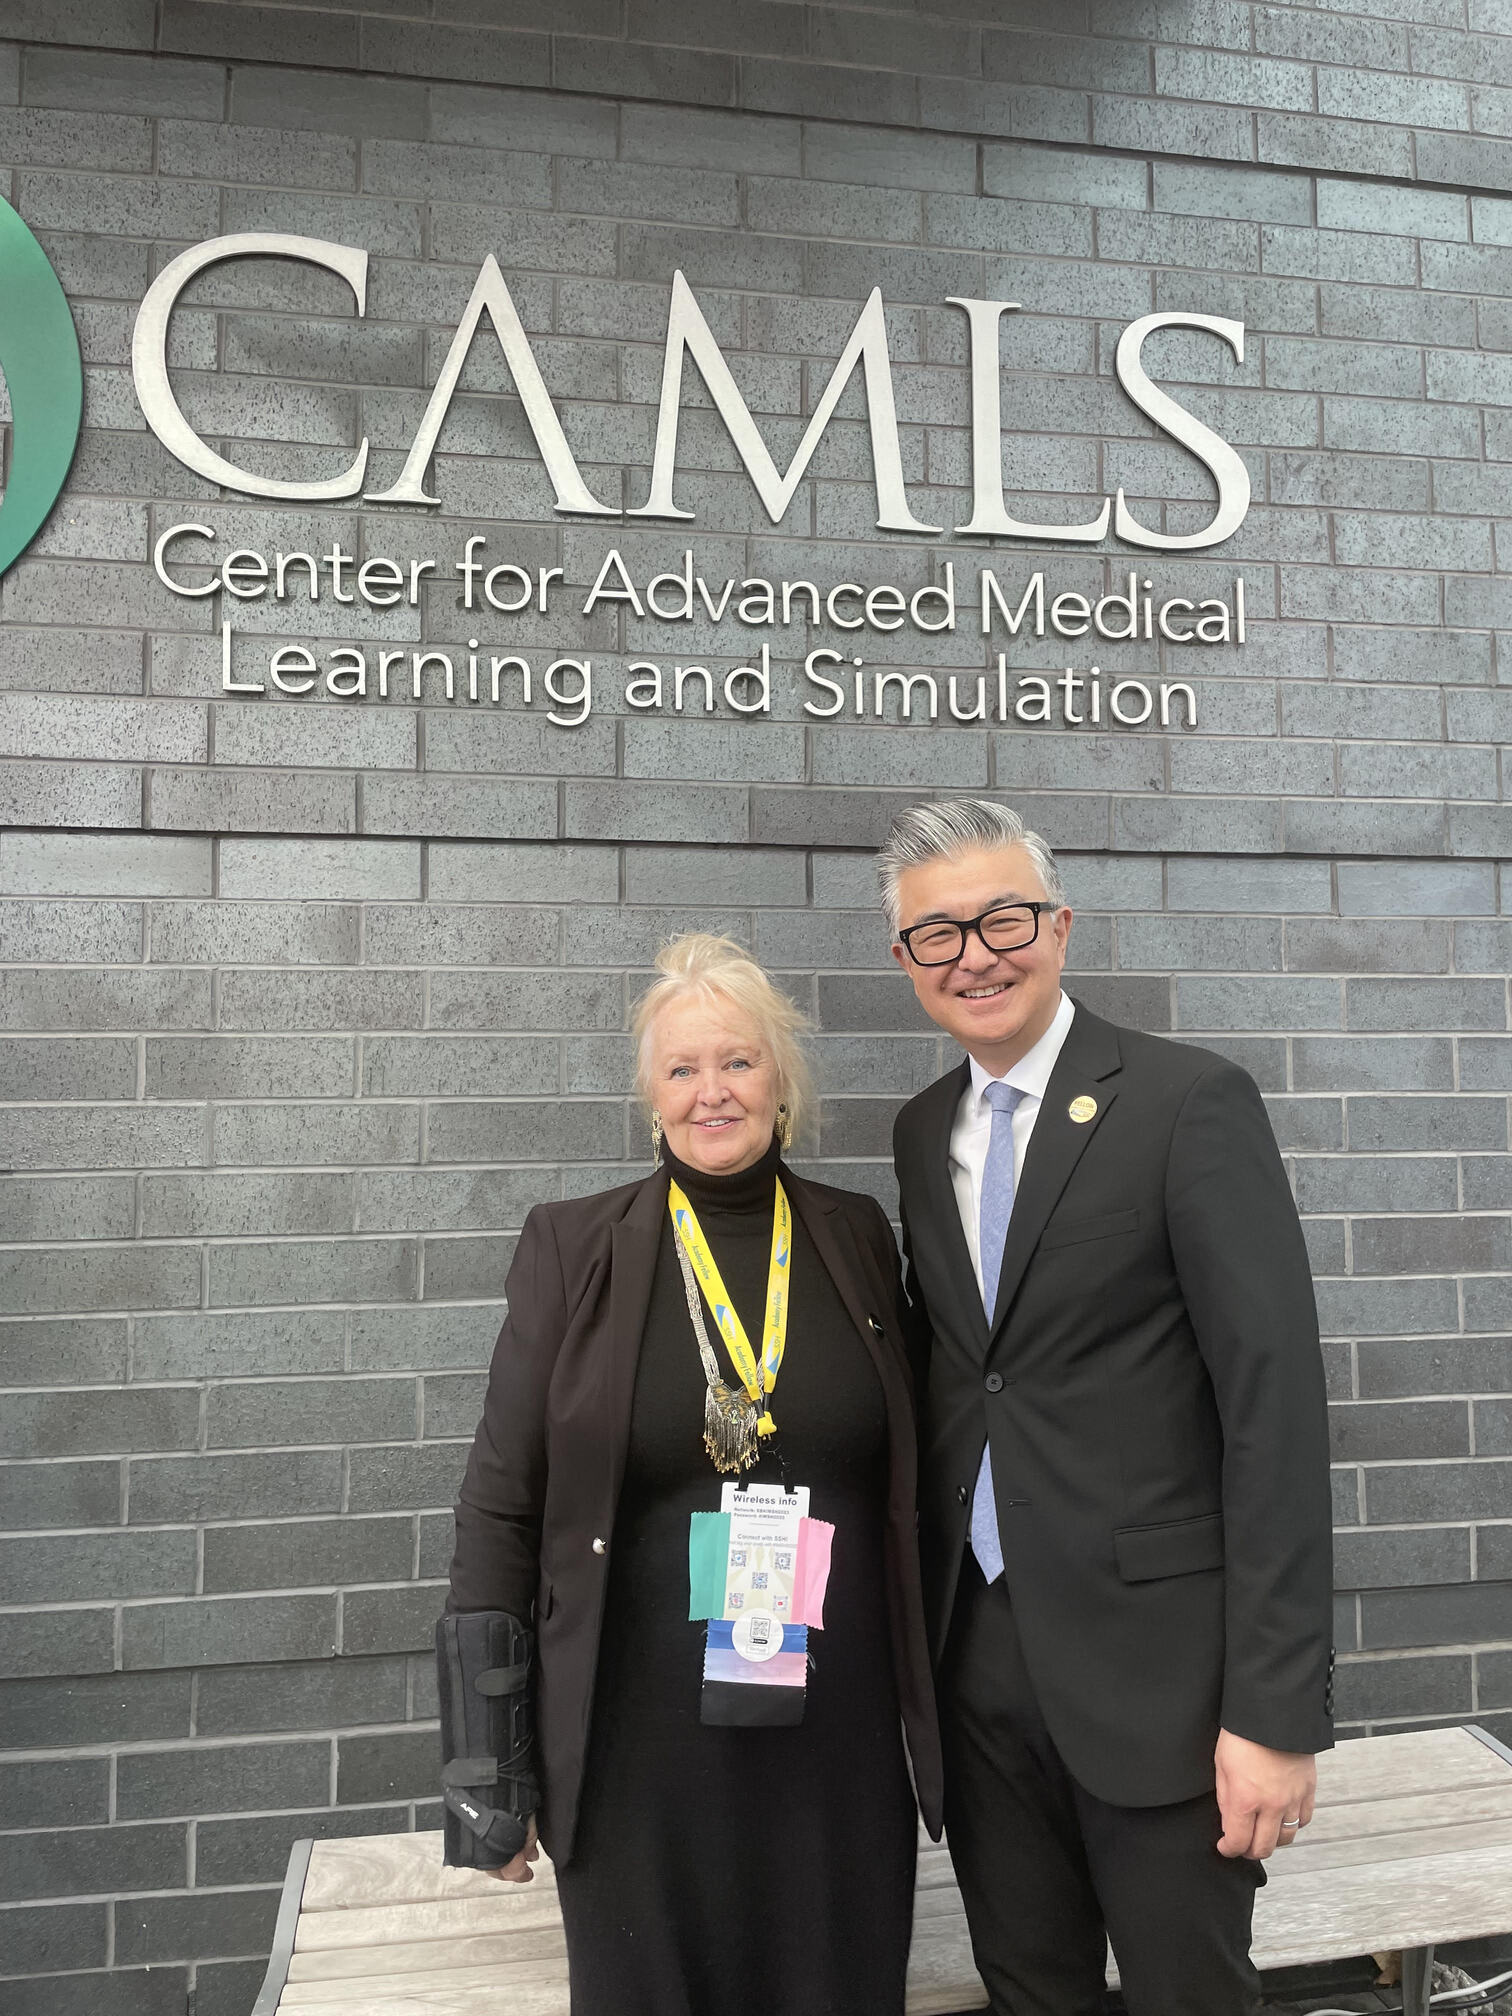 Dr. Jayne Smitten and the past SSH President Dr. Haru Okuda from Tampa, Florida, in front of the extraordinary 90,000 sq ft CAMLS Sim Center.